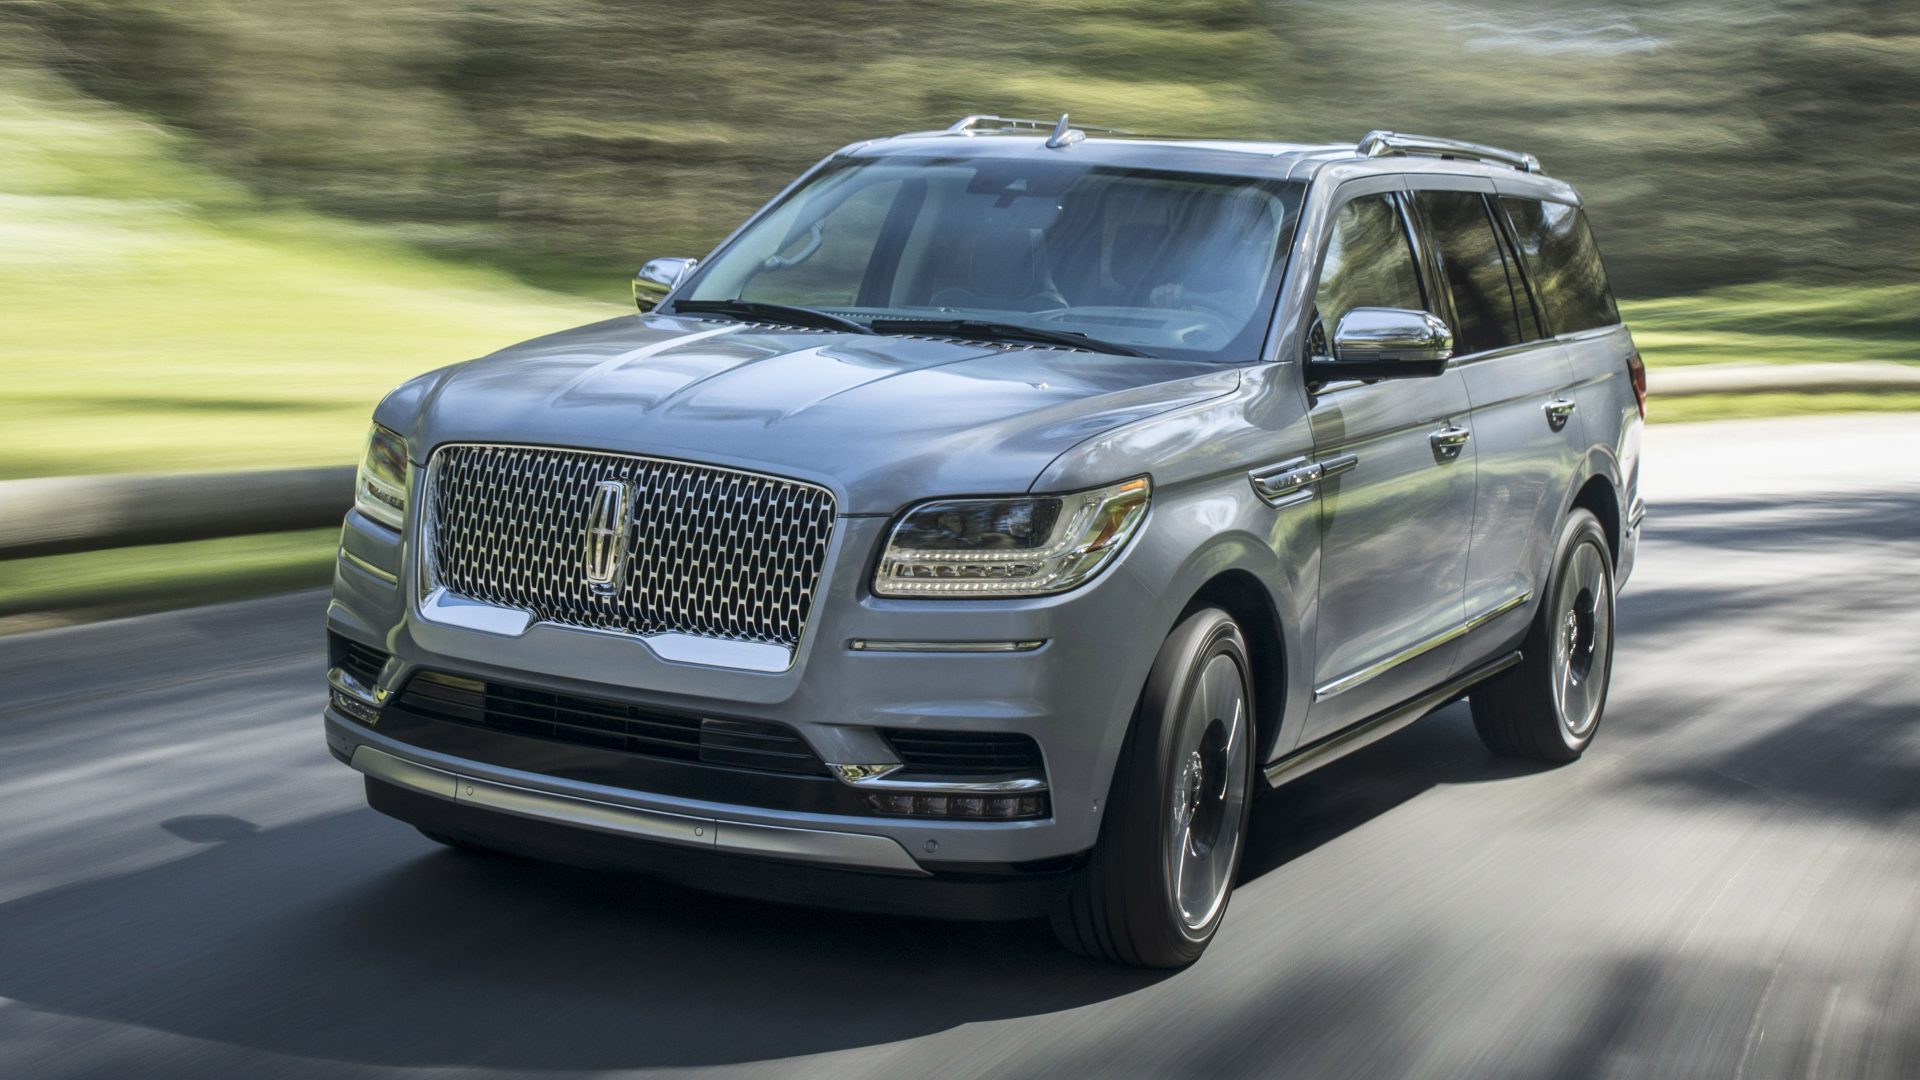 lincoln_navigator front angula view in the motion